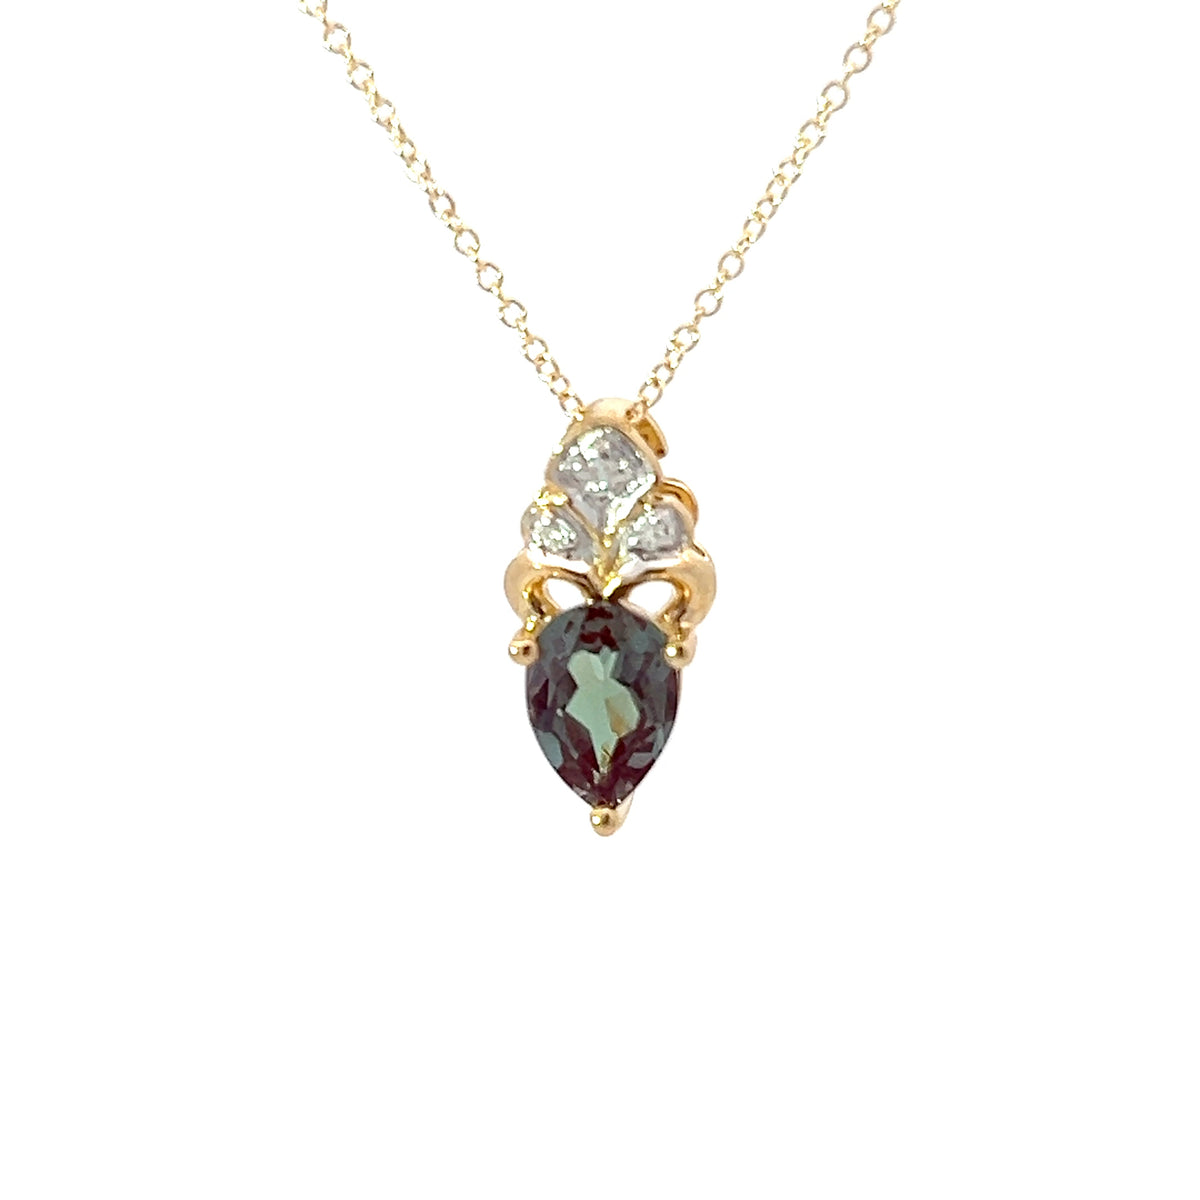 10K Yellow Gold 7x5mm Pear Cut Created Alexandrite and 0.018cttw Diamond Necklace - 18 Inches